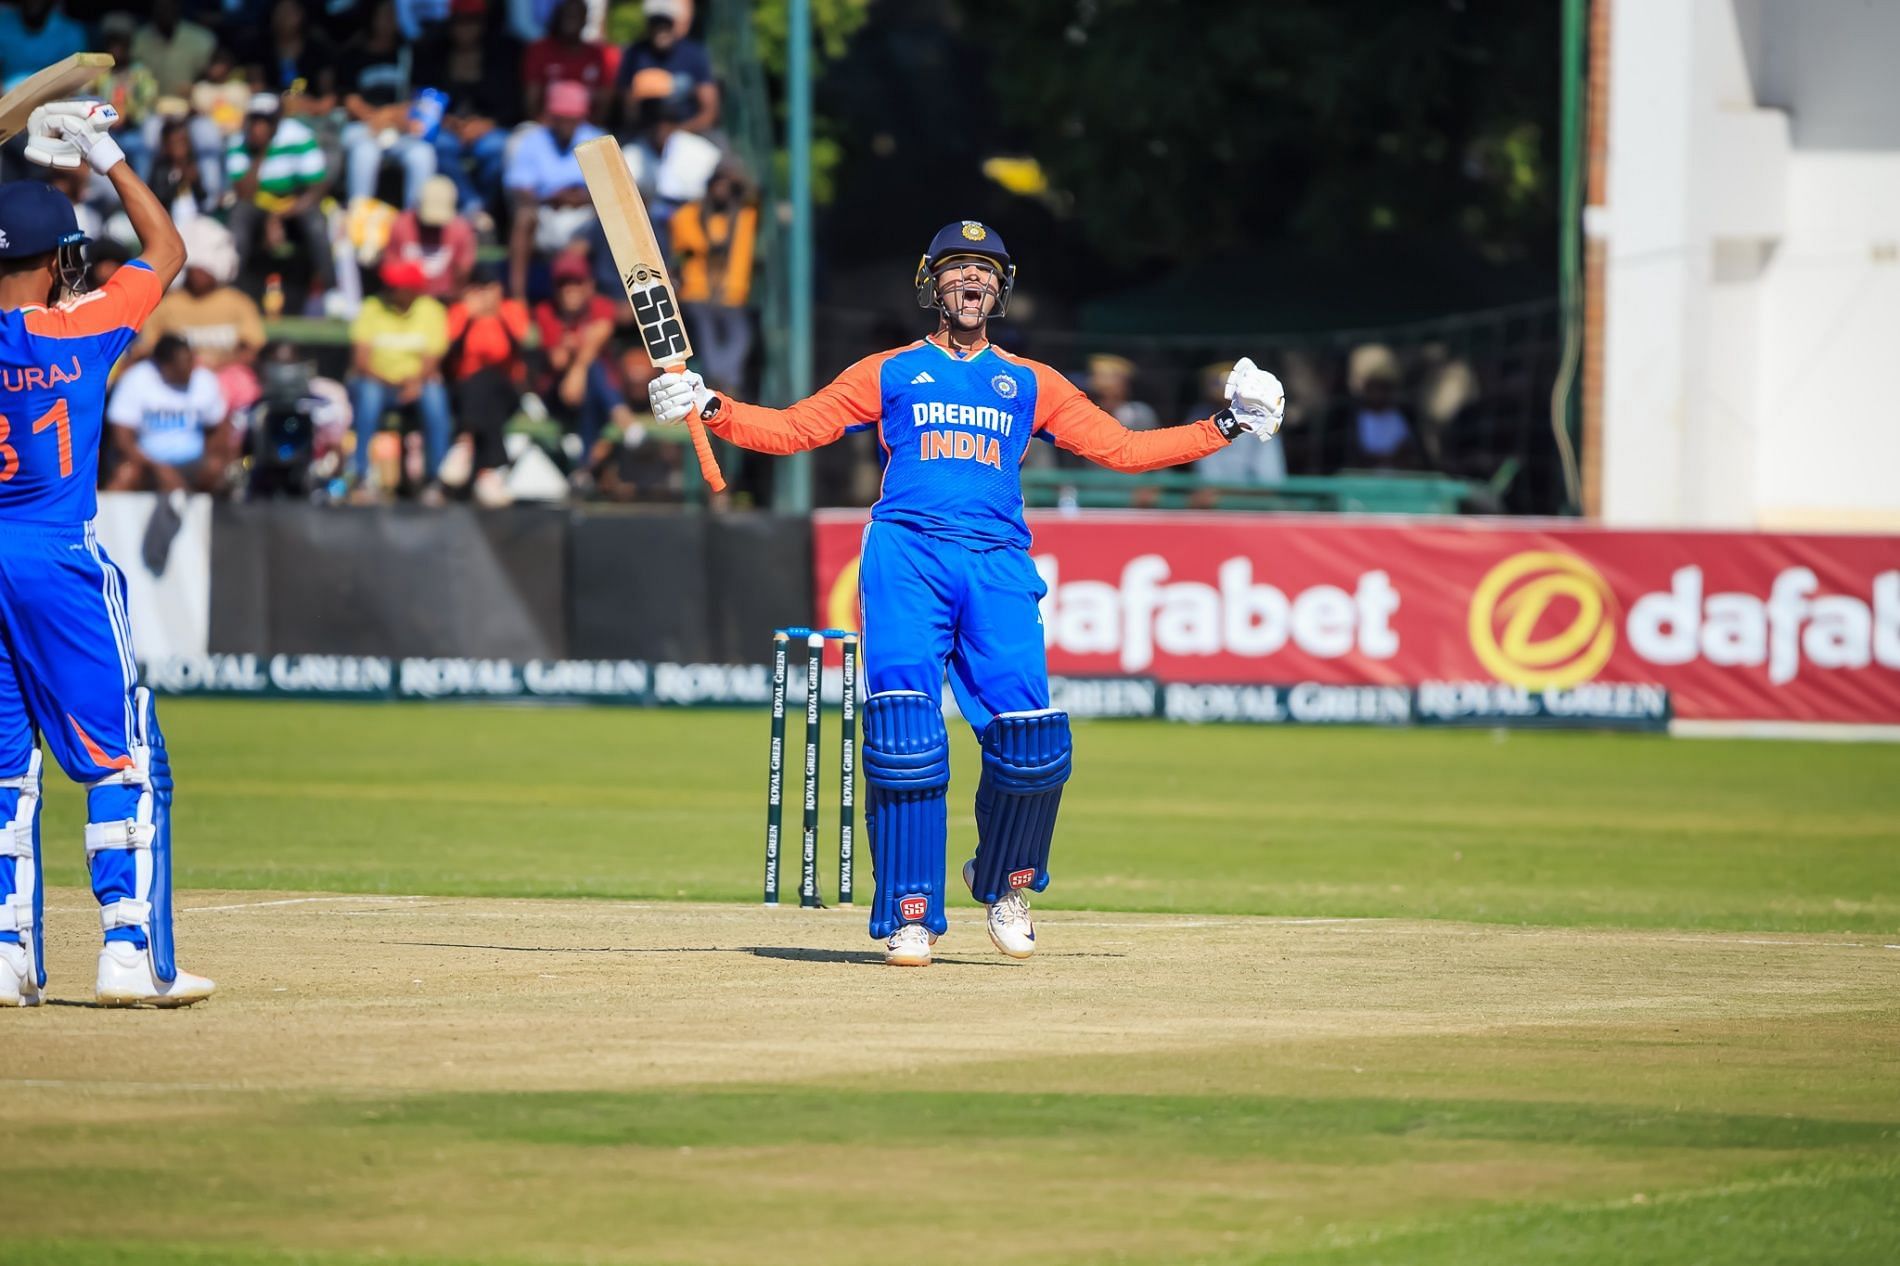 Played with Gill’s bat, do it whenever I play a pressure game: Abhishek Sharma makes interesting revelation after superb ton in IND vs ZIM 2nd T20I